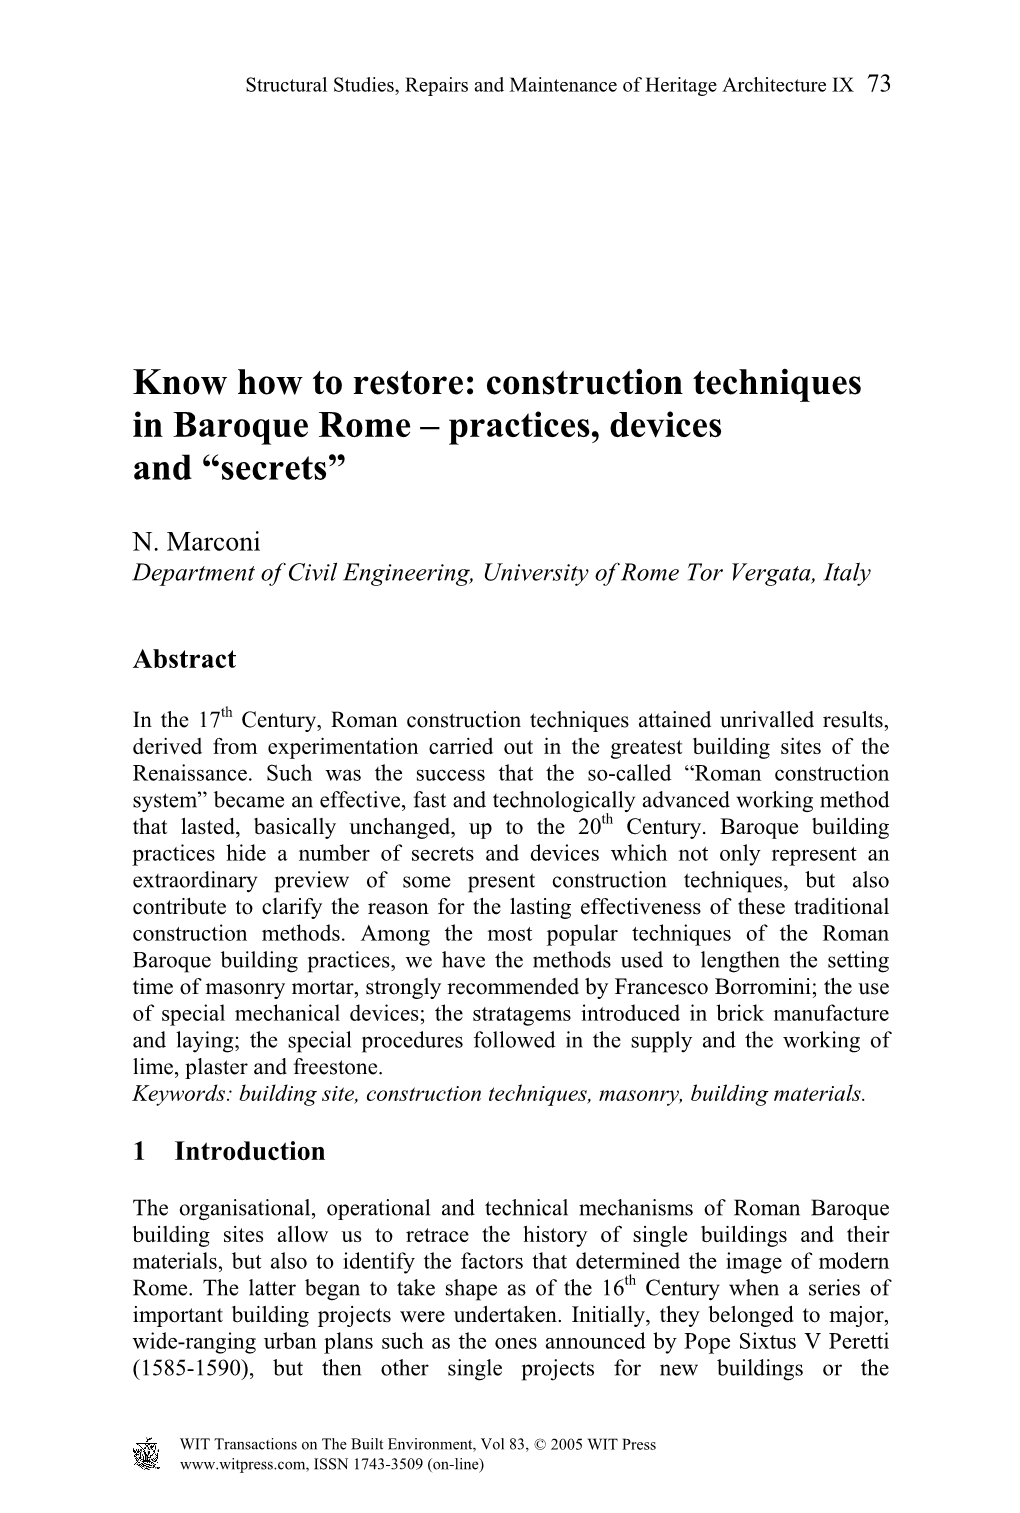 Construction Techniques in Baroque Rome – Practices, Devices and “Secrets”